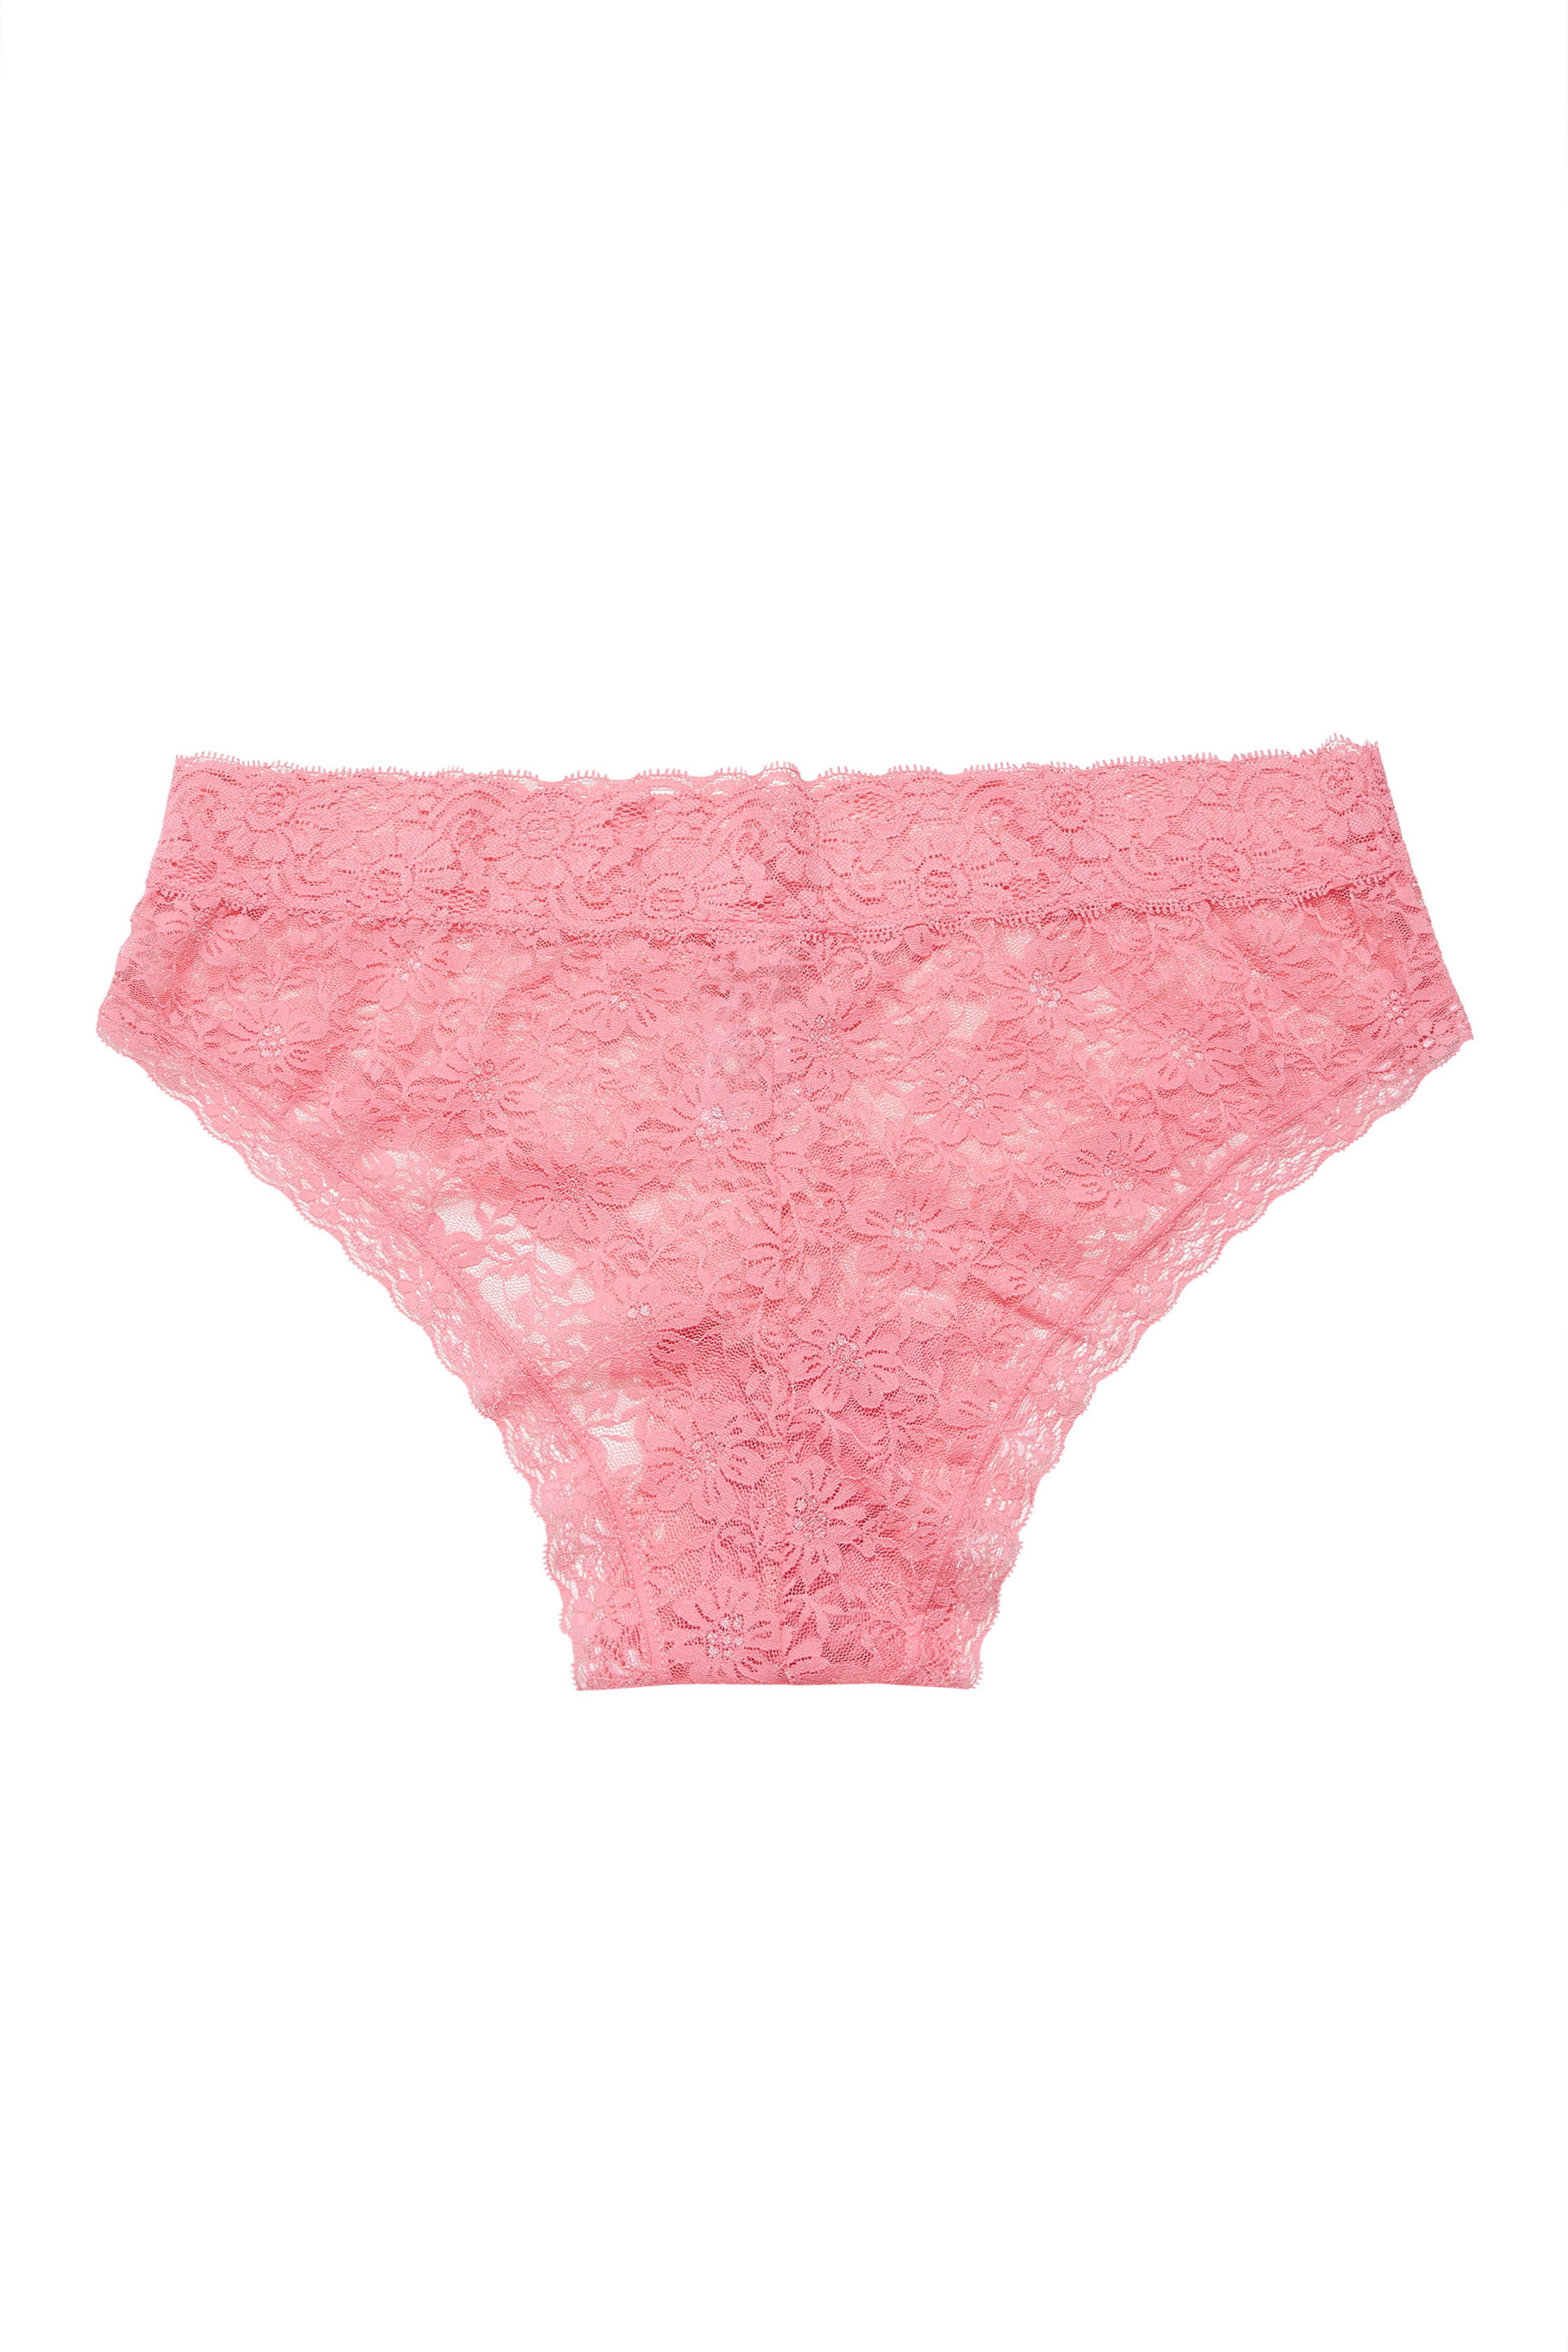 3 PACK Black & PInk Lace Briefs | Yours Clothing